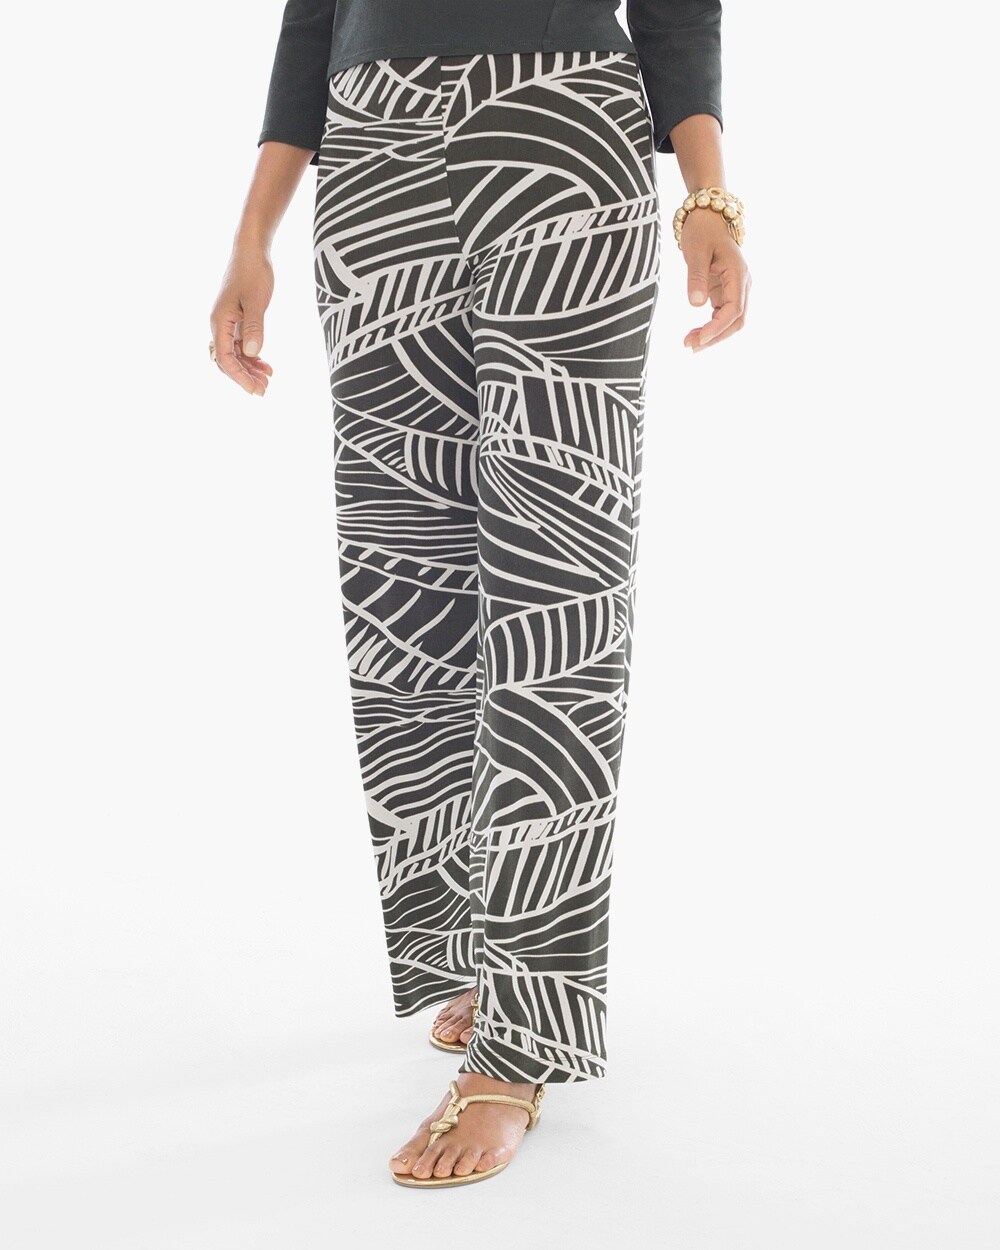 Travelers Classic Linear Leaves Palazzo Pants